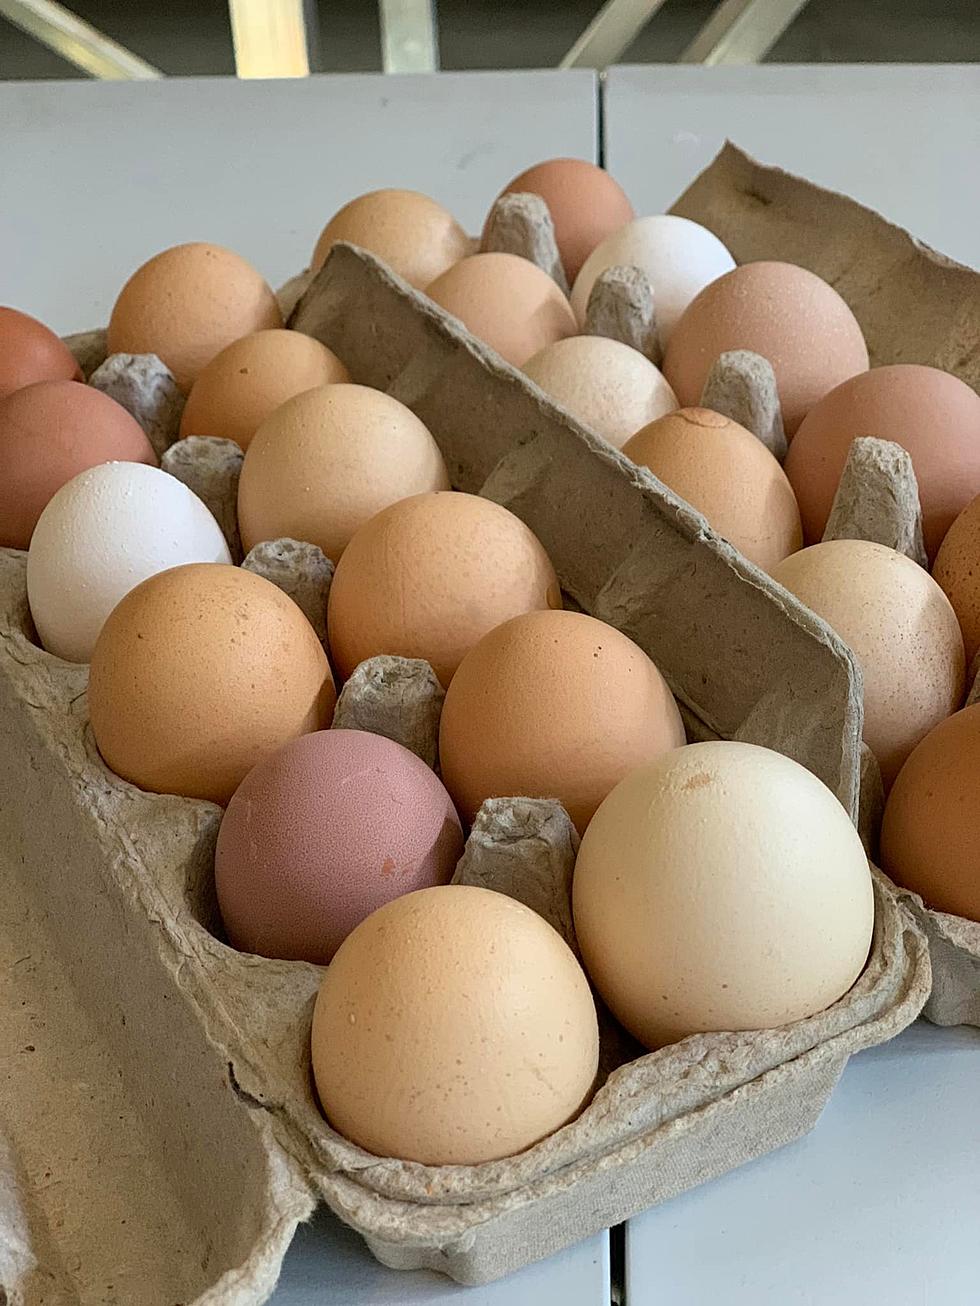 One Illinois Family Is Putting All Their Eggs In St. Jude’s Basket